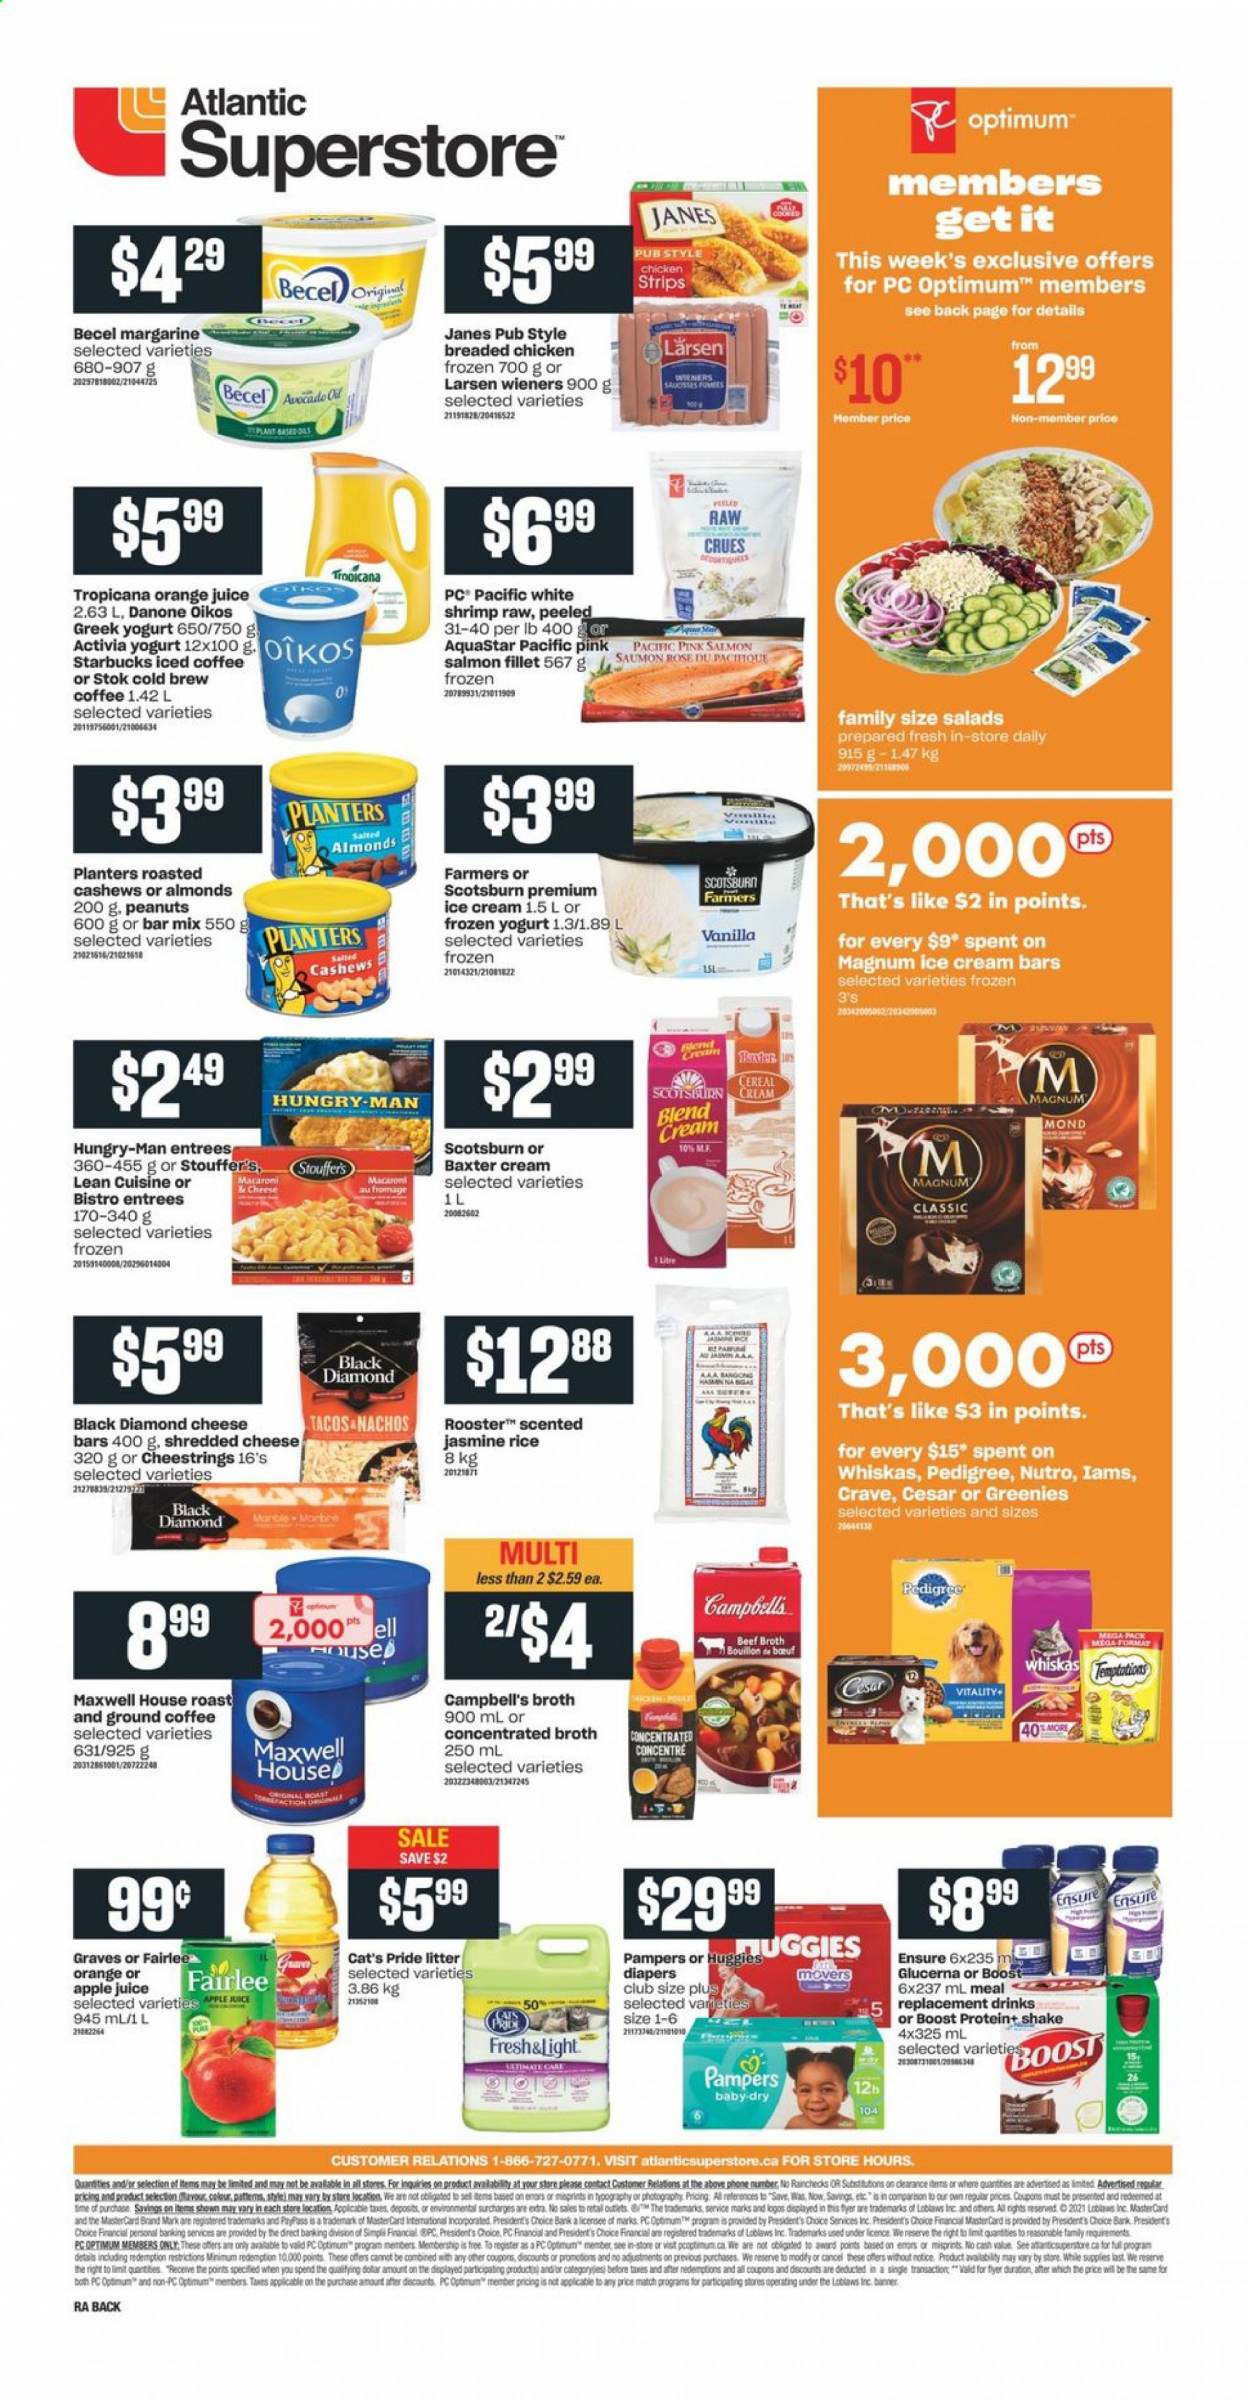 Atlantic Superstore flyer  - March 11, 2021 - March 17, 2021. Page 2.